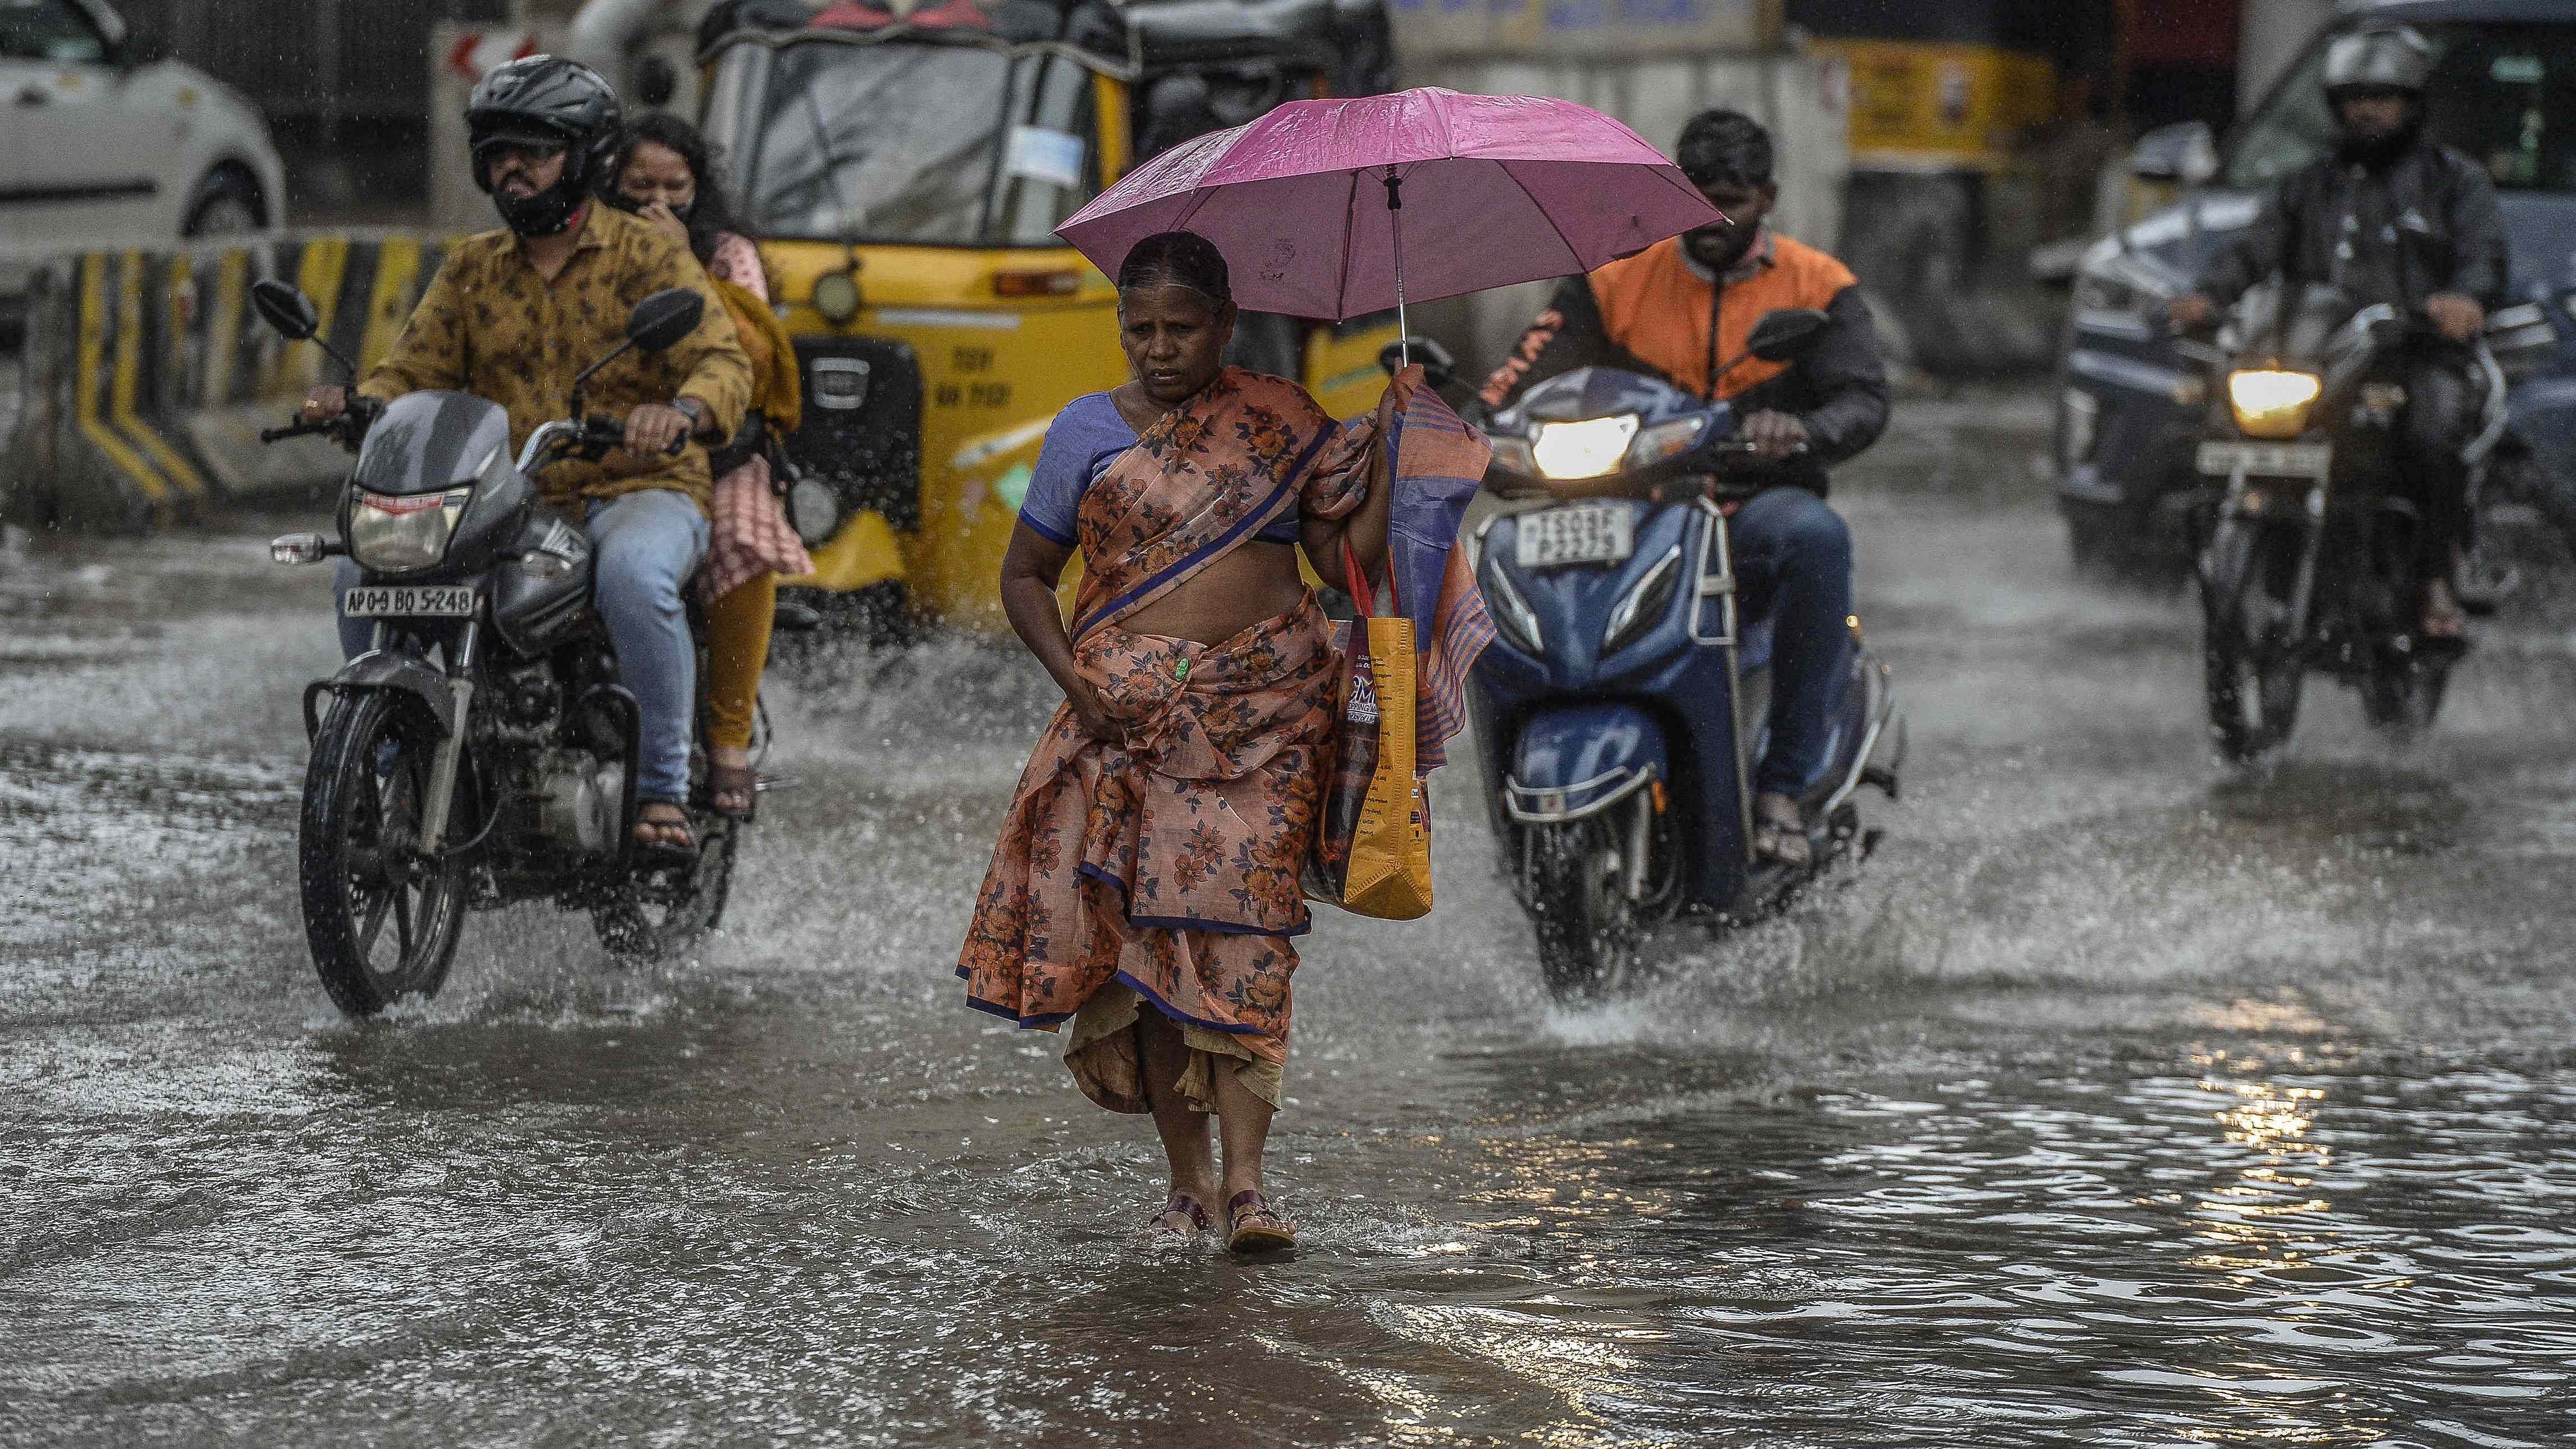 Commuters make their way along a waterlogged street during monsoon rainfall in Hyderabad. Credit: AFP Photo